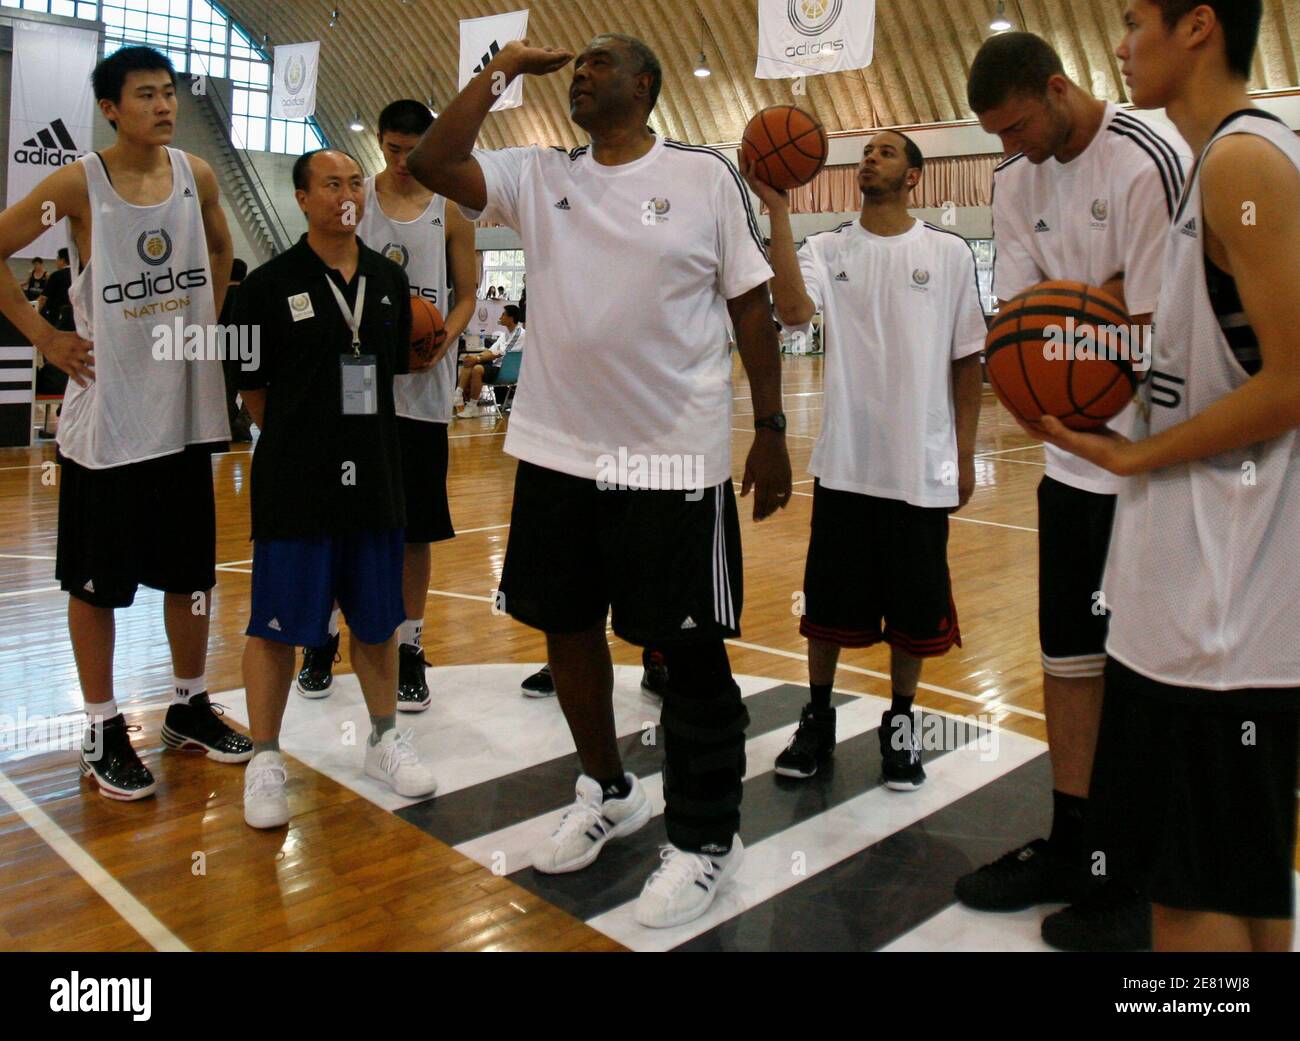 Paul Silas (C), the former coach of the Cleveland Cavaliers, demonstrates  how to shoot a basket during the Adidas training camp in Beijing May 19,  2009. Lebron James has become such a